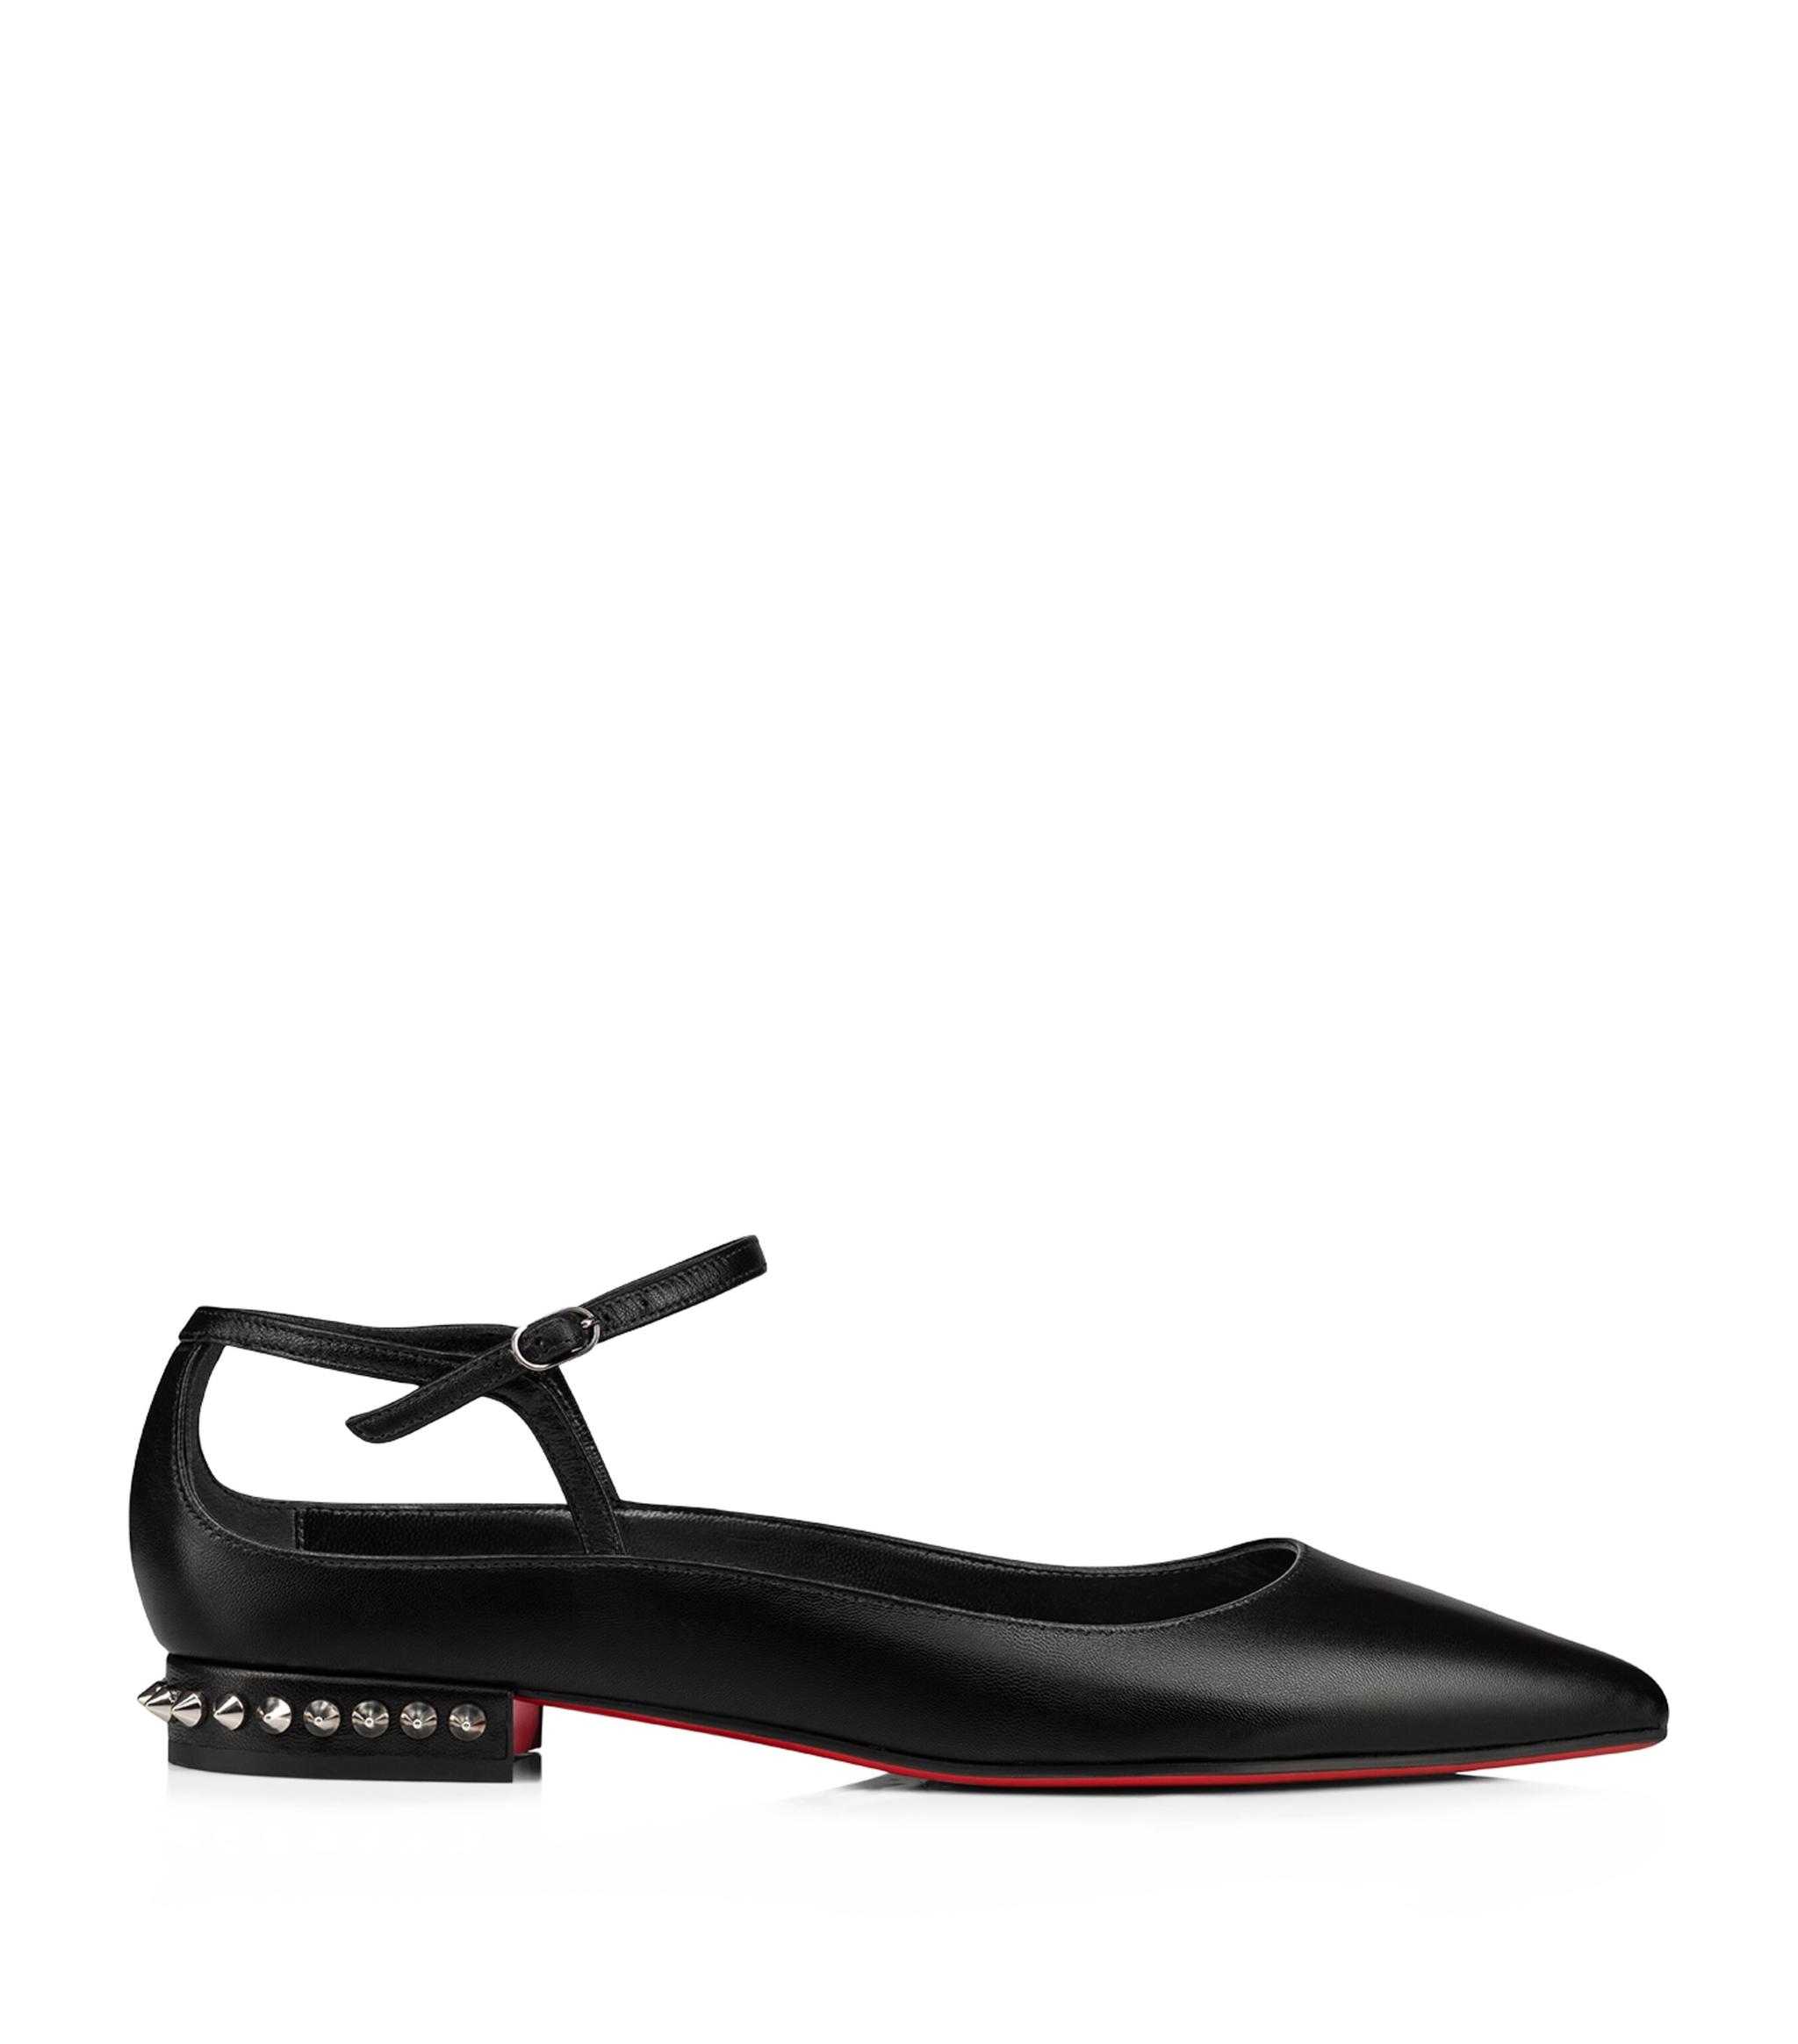 Christian Louboutin Conclusive Spike Ballerina Flats in Black | Lyst